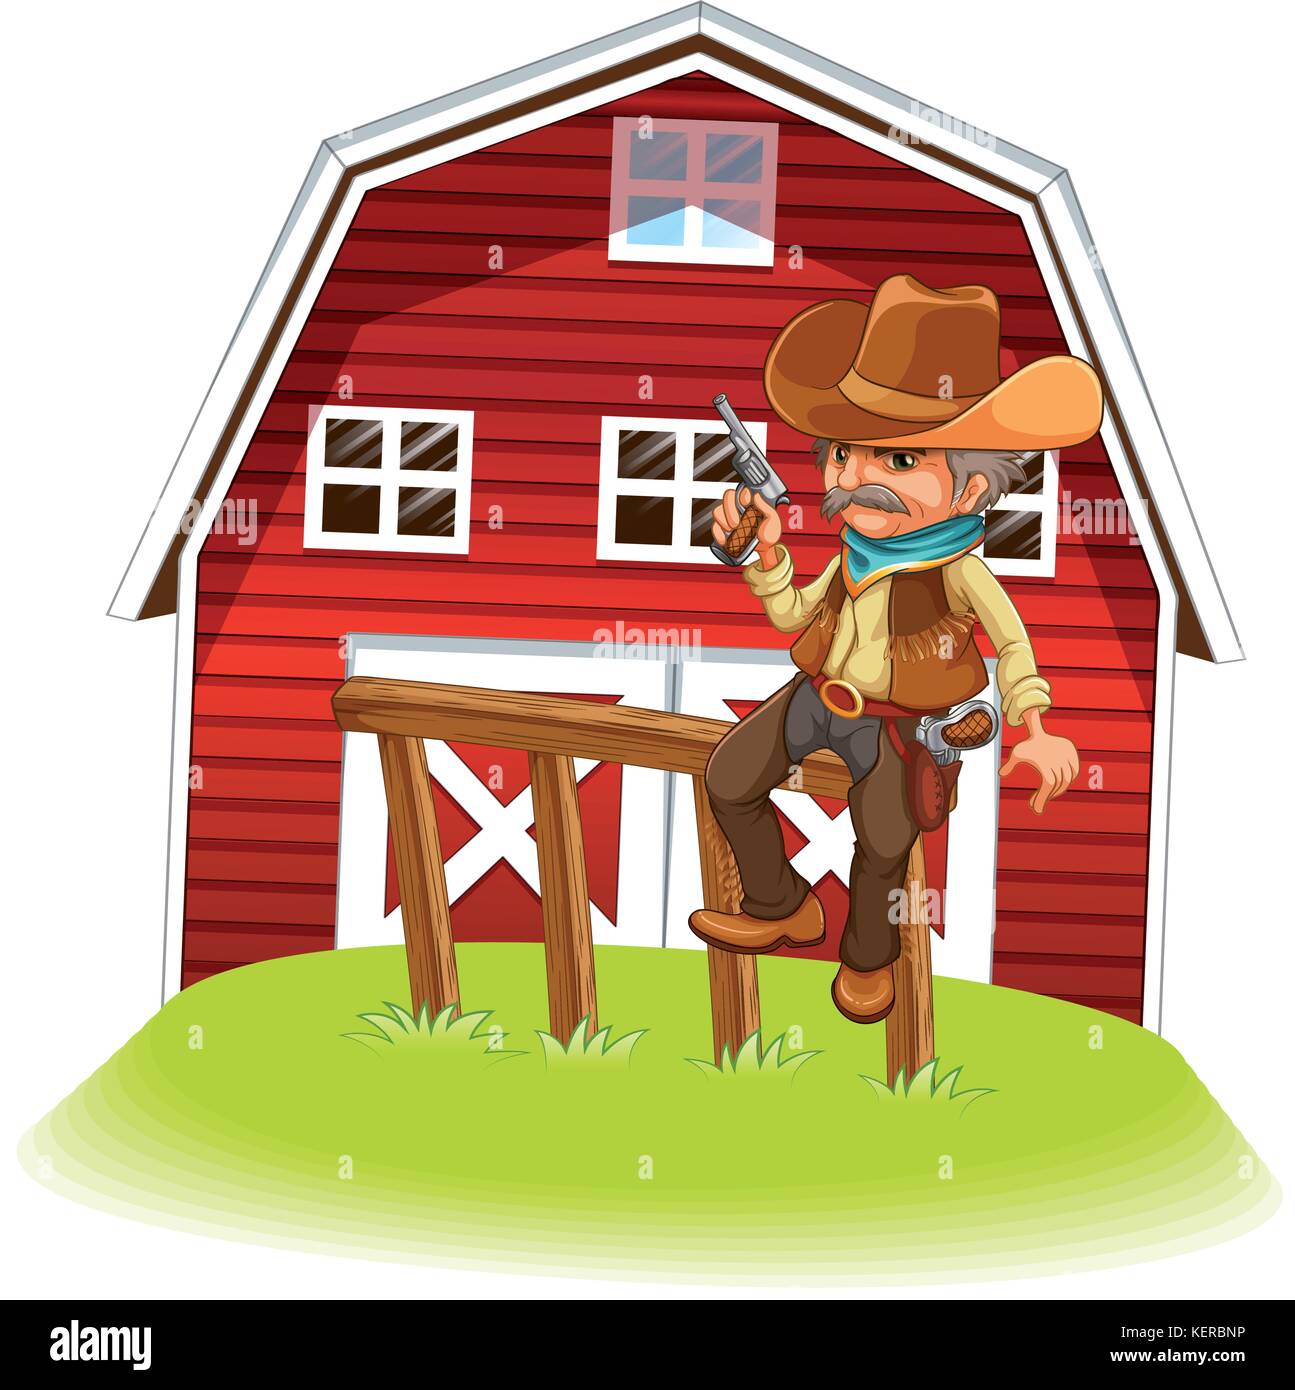 Illustration of a cowboy holding a gun sitting on a wood in front of the barnhouse on a white background Stock Vector